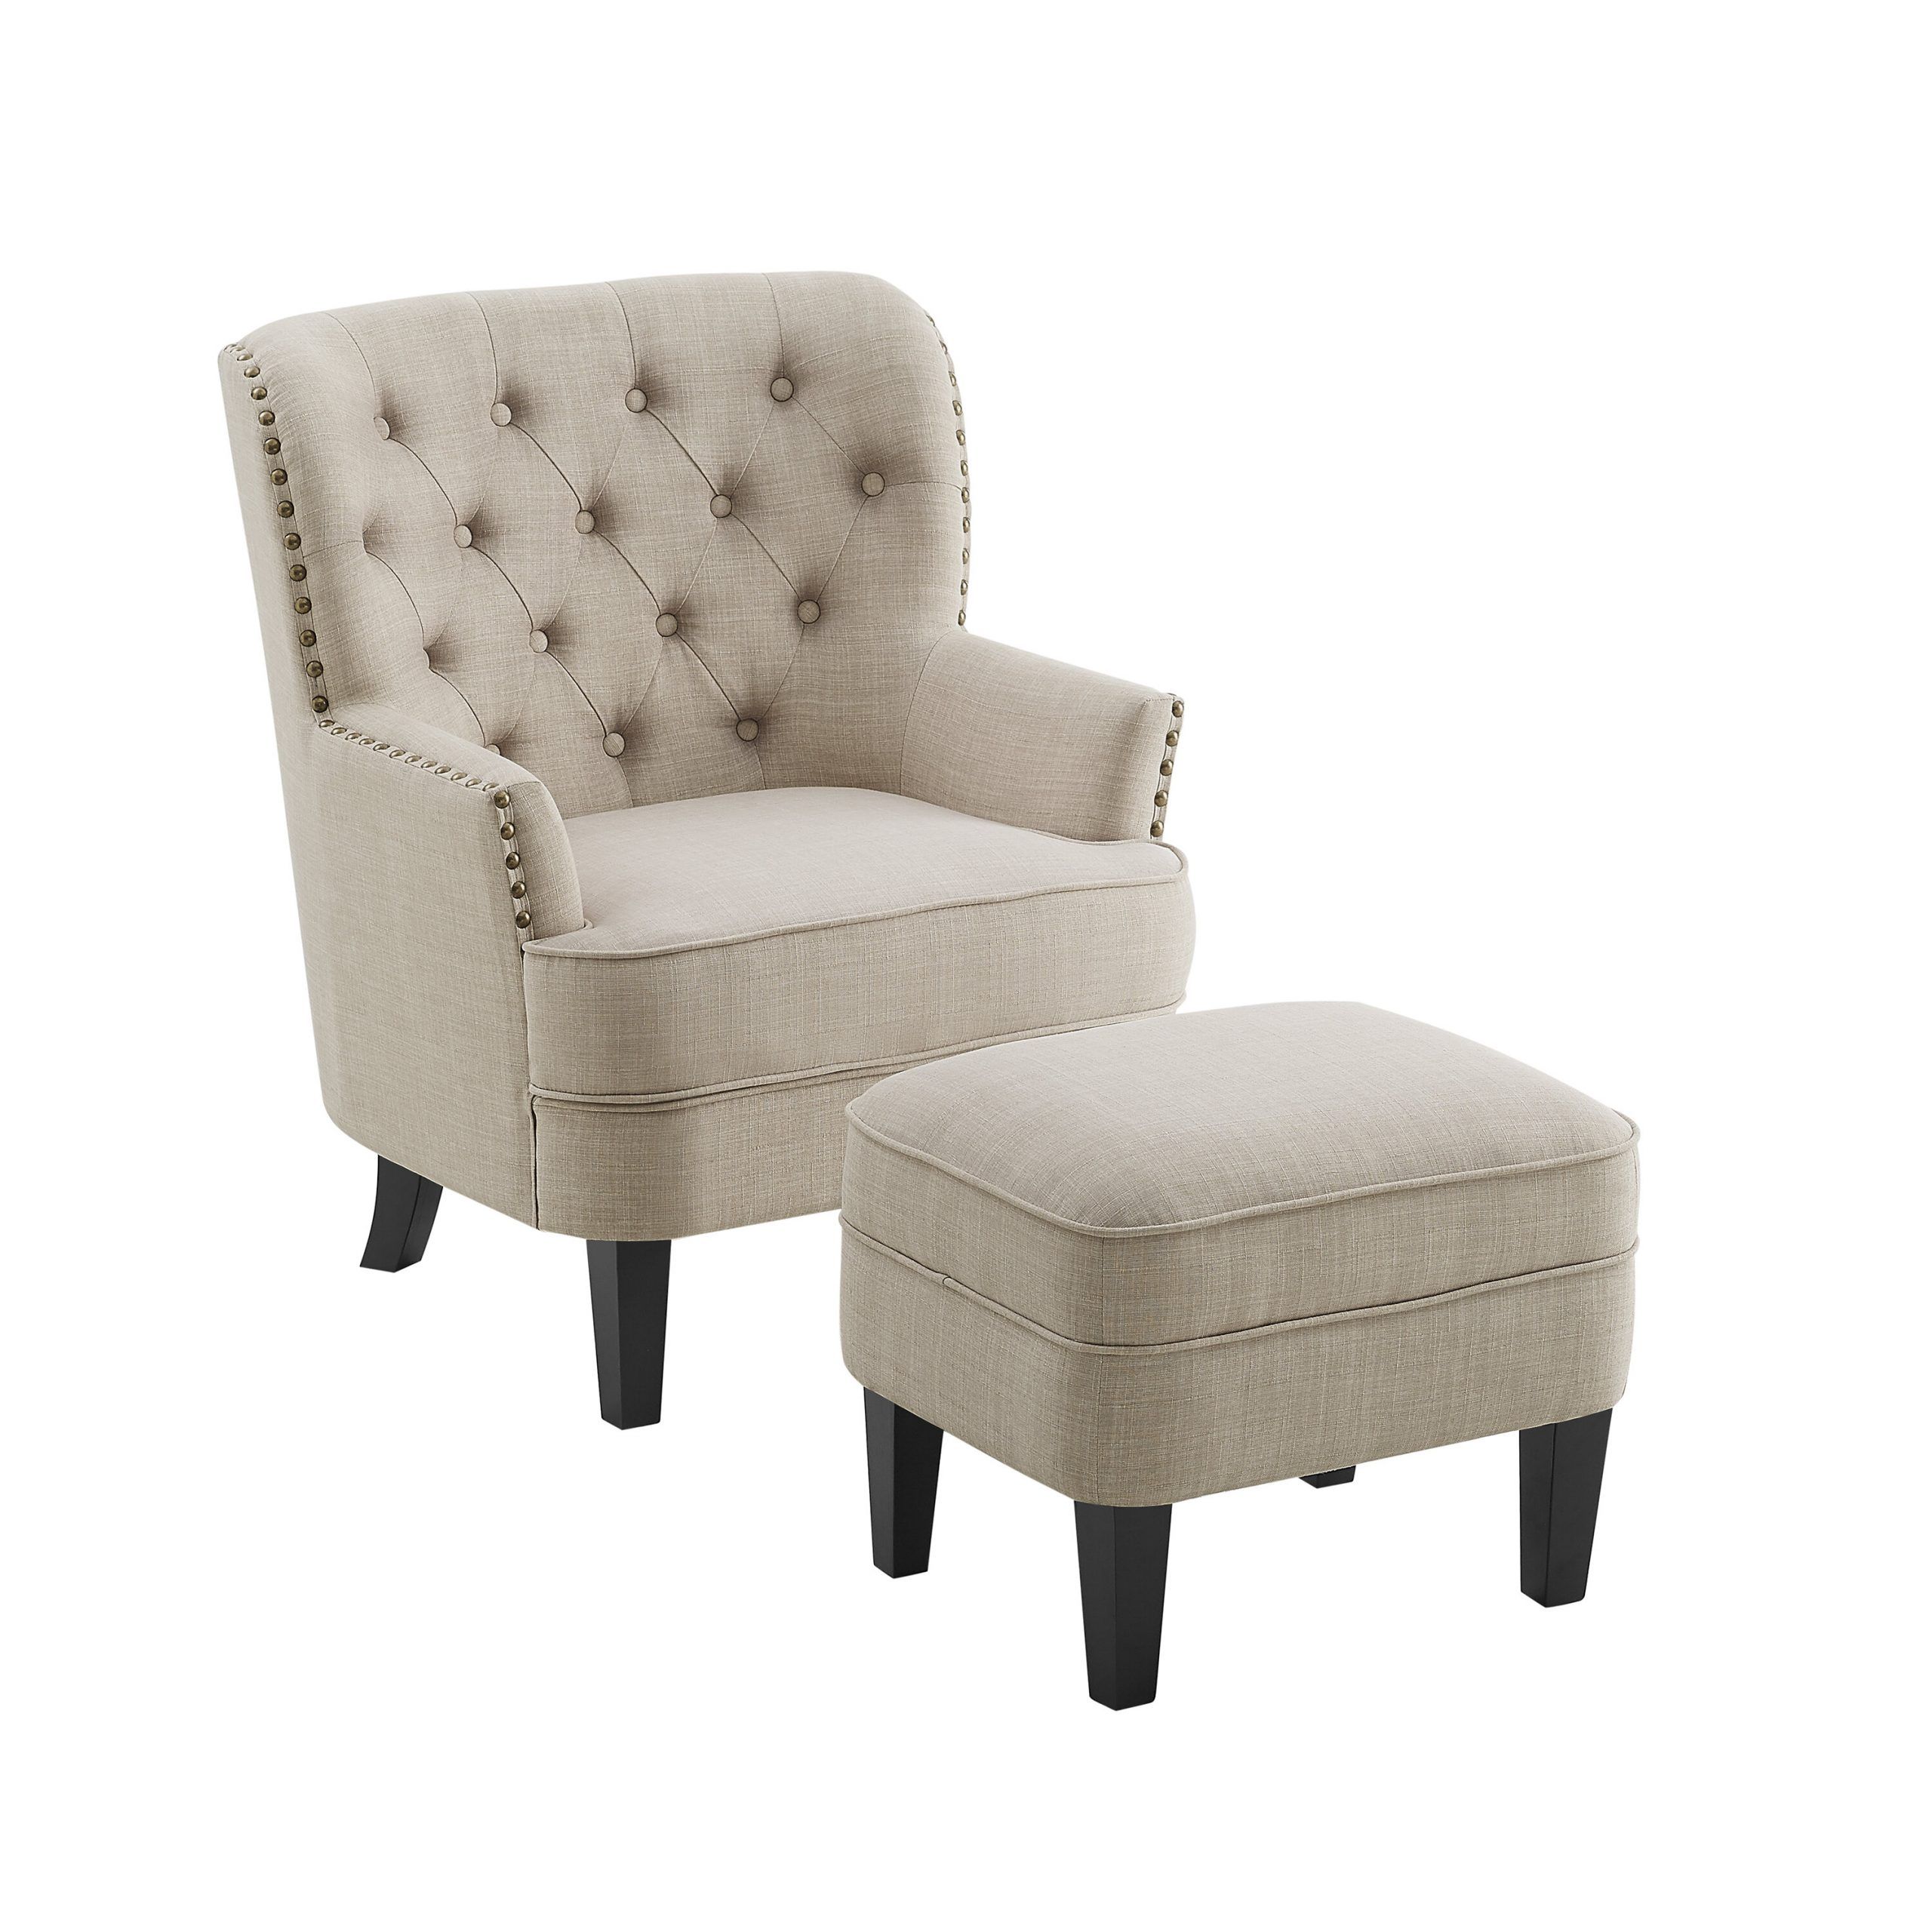 Accent Chairs | Up To 60% Off Through 01/05 | Wayfair For Michalak Cheswood Armchairs And Ottoman (View 13 of 15)